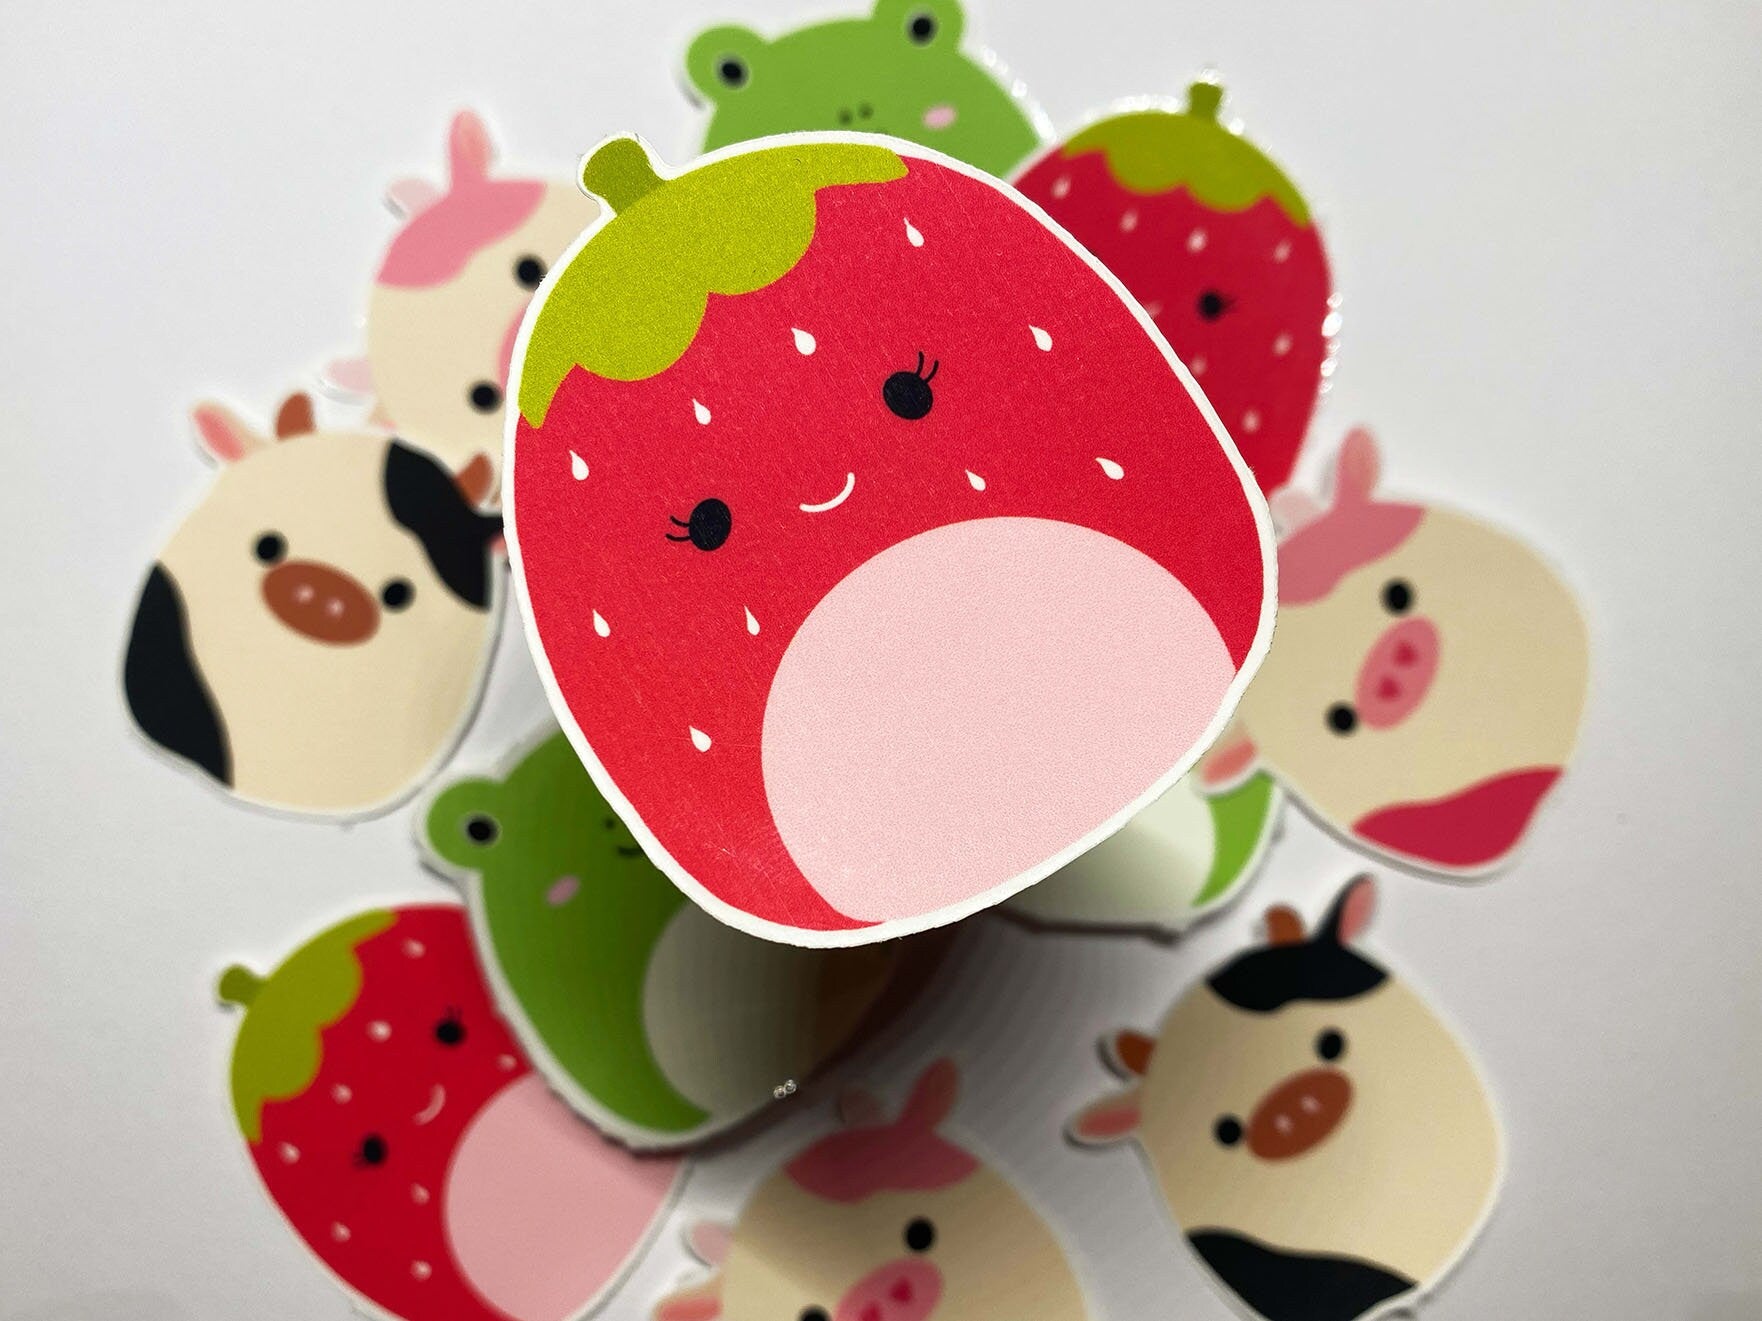 Squish Mallows Stuffed Animals (Cow, pink cow, frog, strawberry) Stickers :2 inches